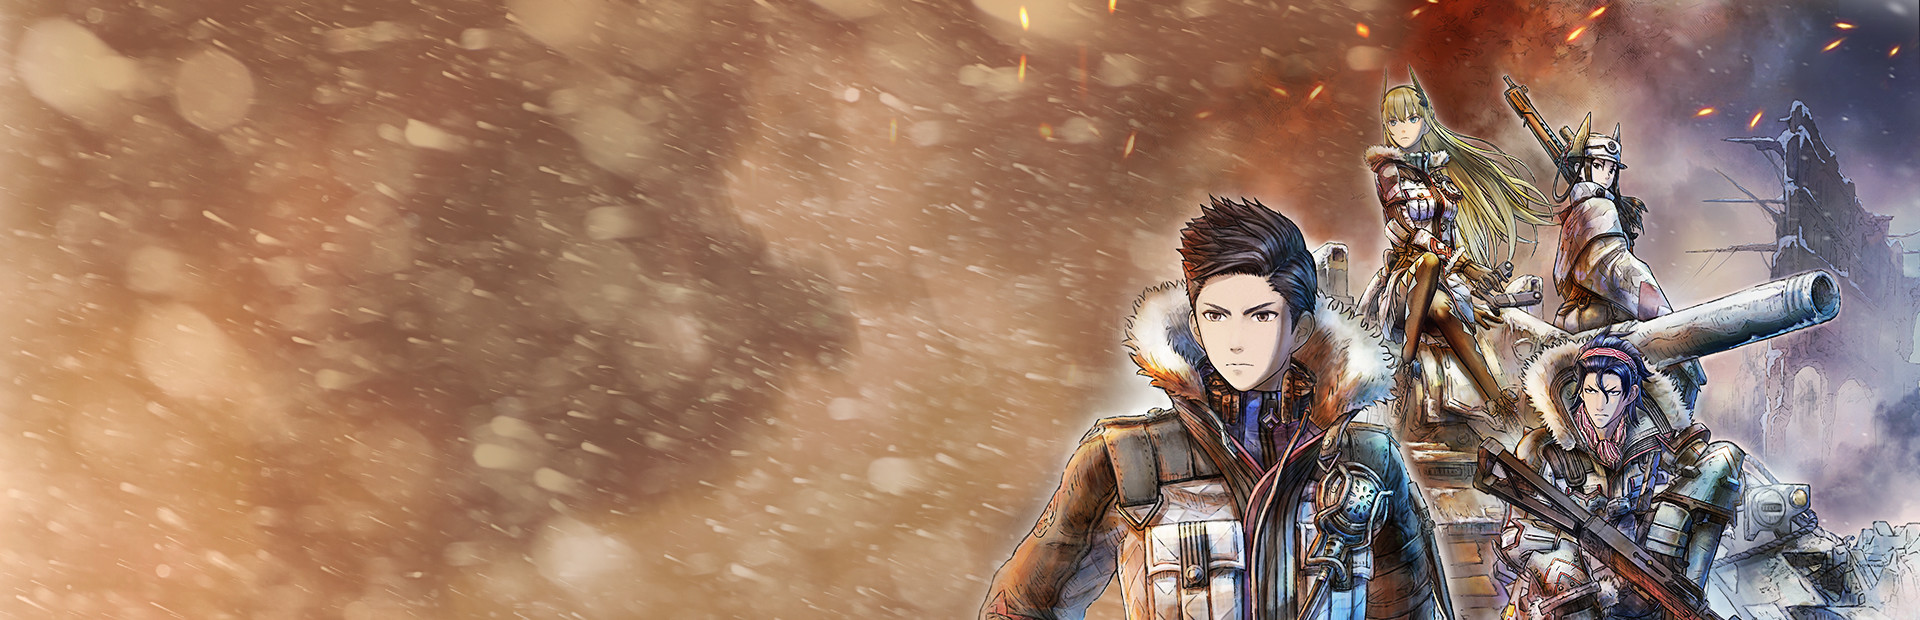 Valkyria Chronicles 4 Complete Edition cover image